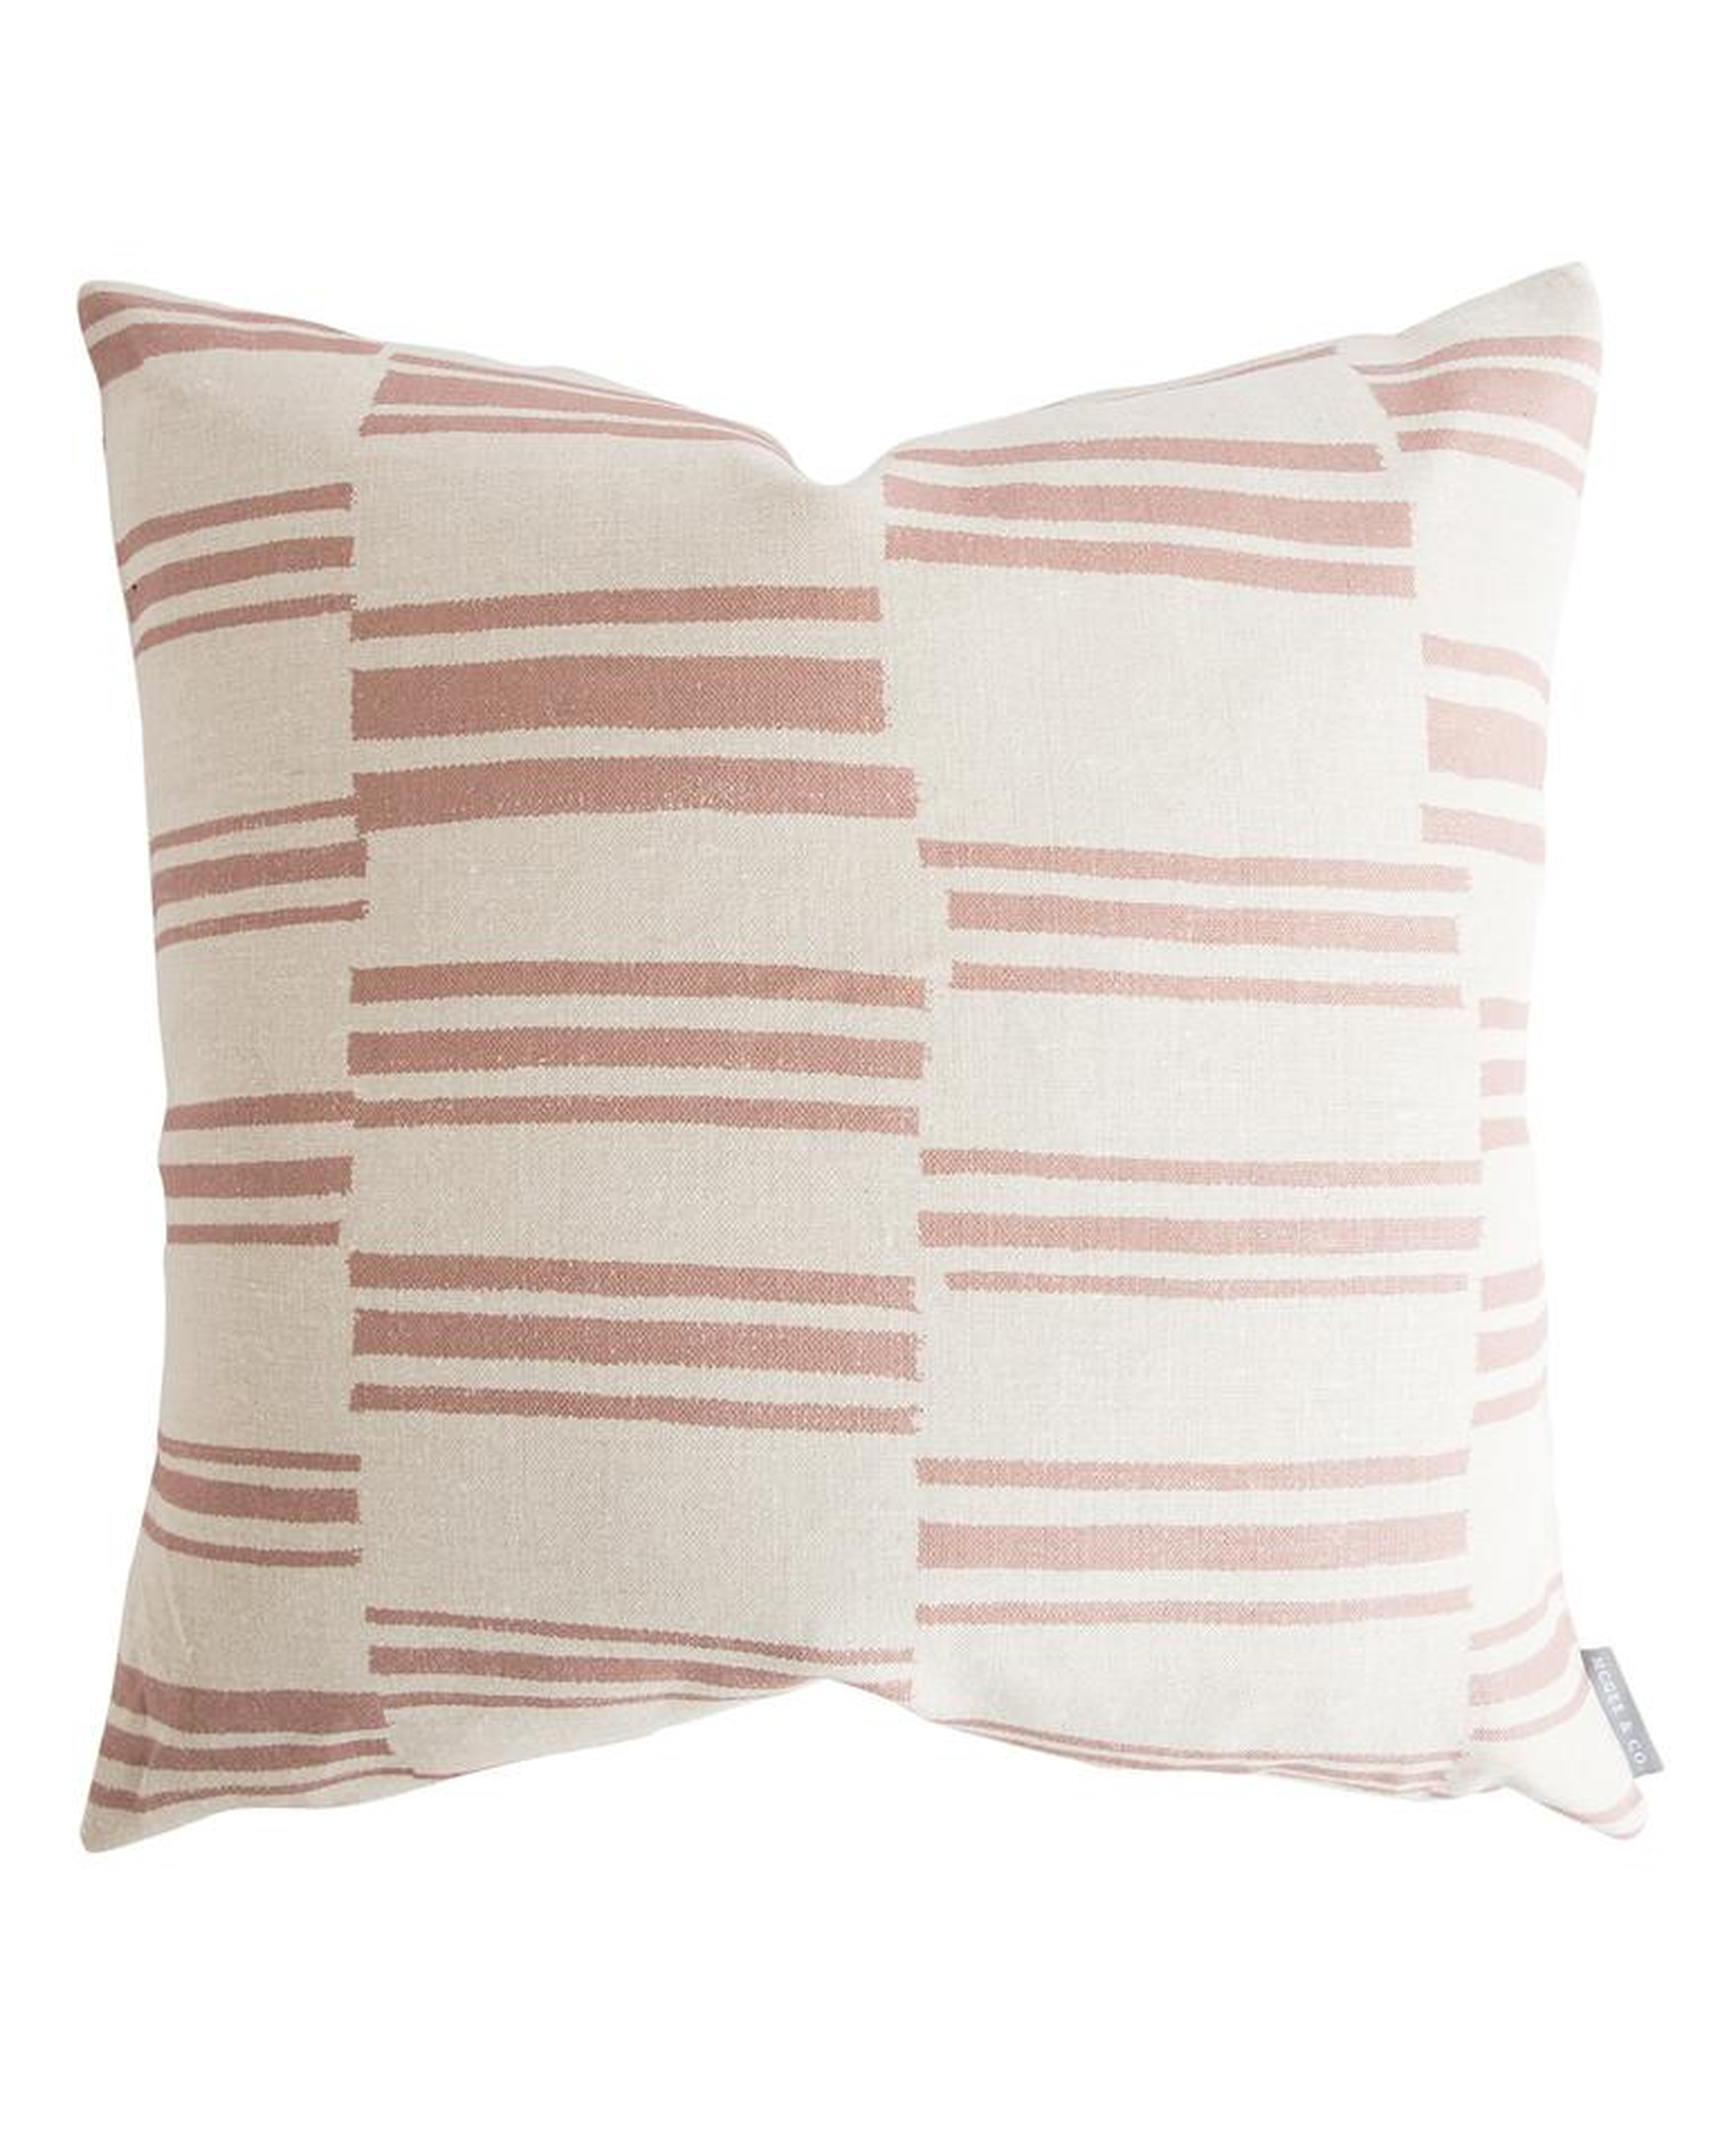 BEVERLY PILLOW WITHOUT INSERT, 20" x 20" - McGee & Co.